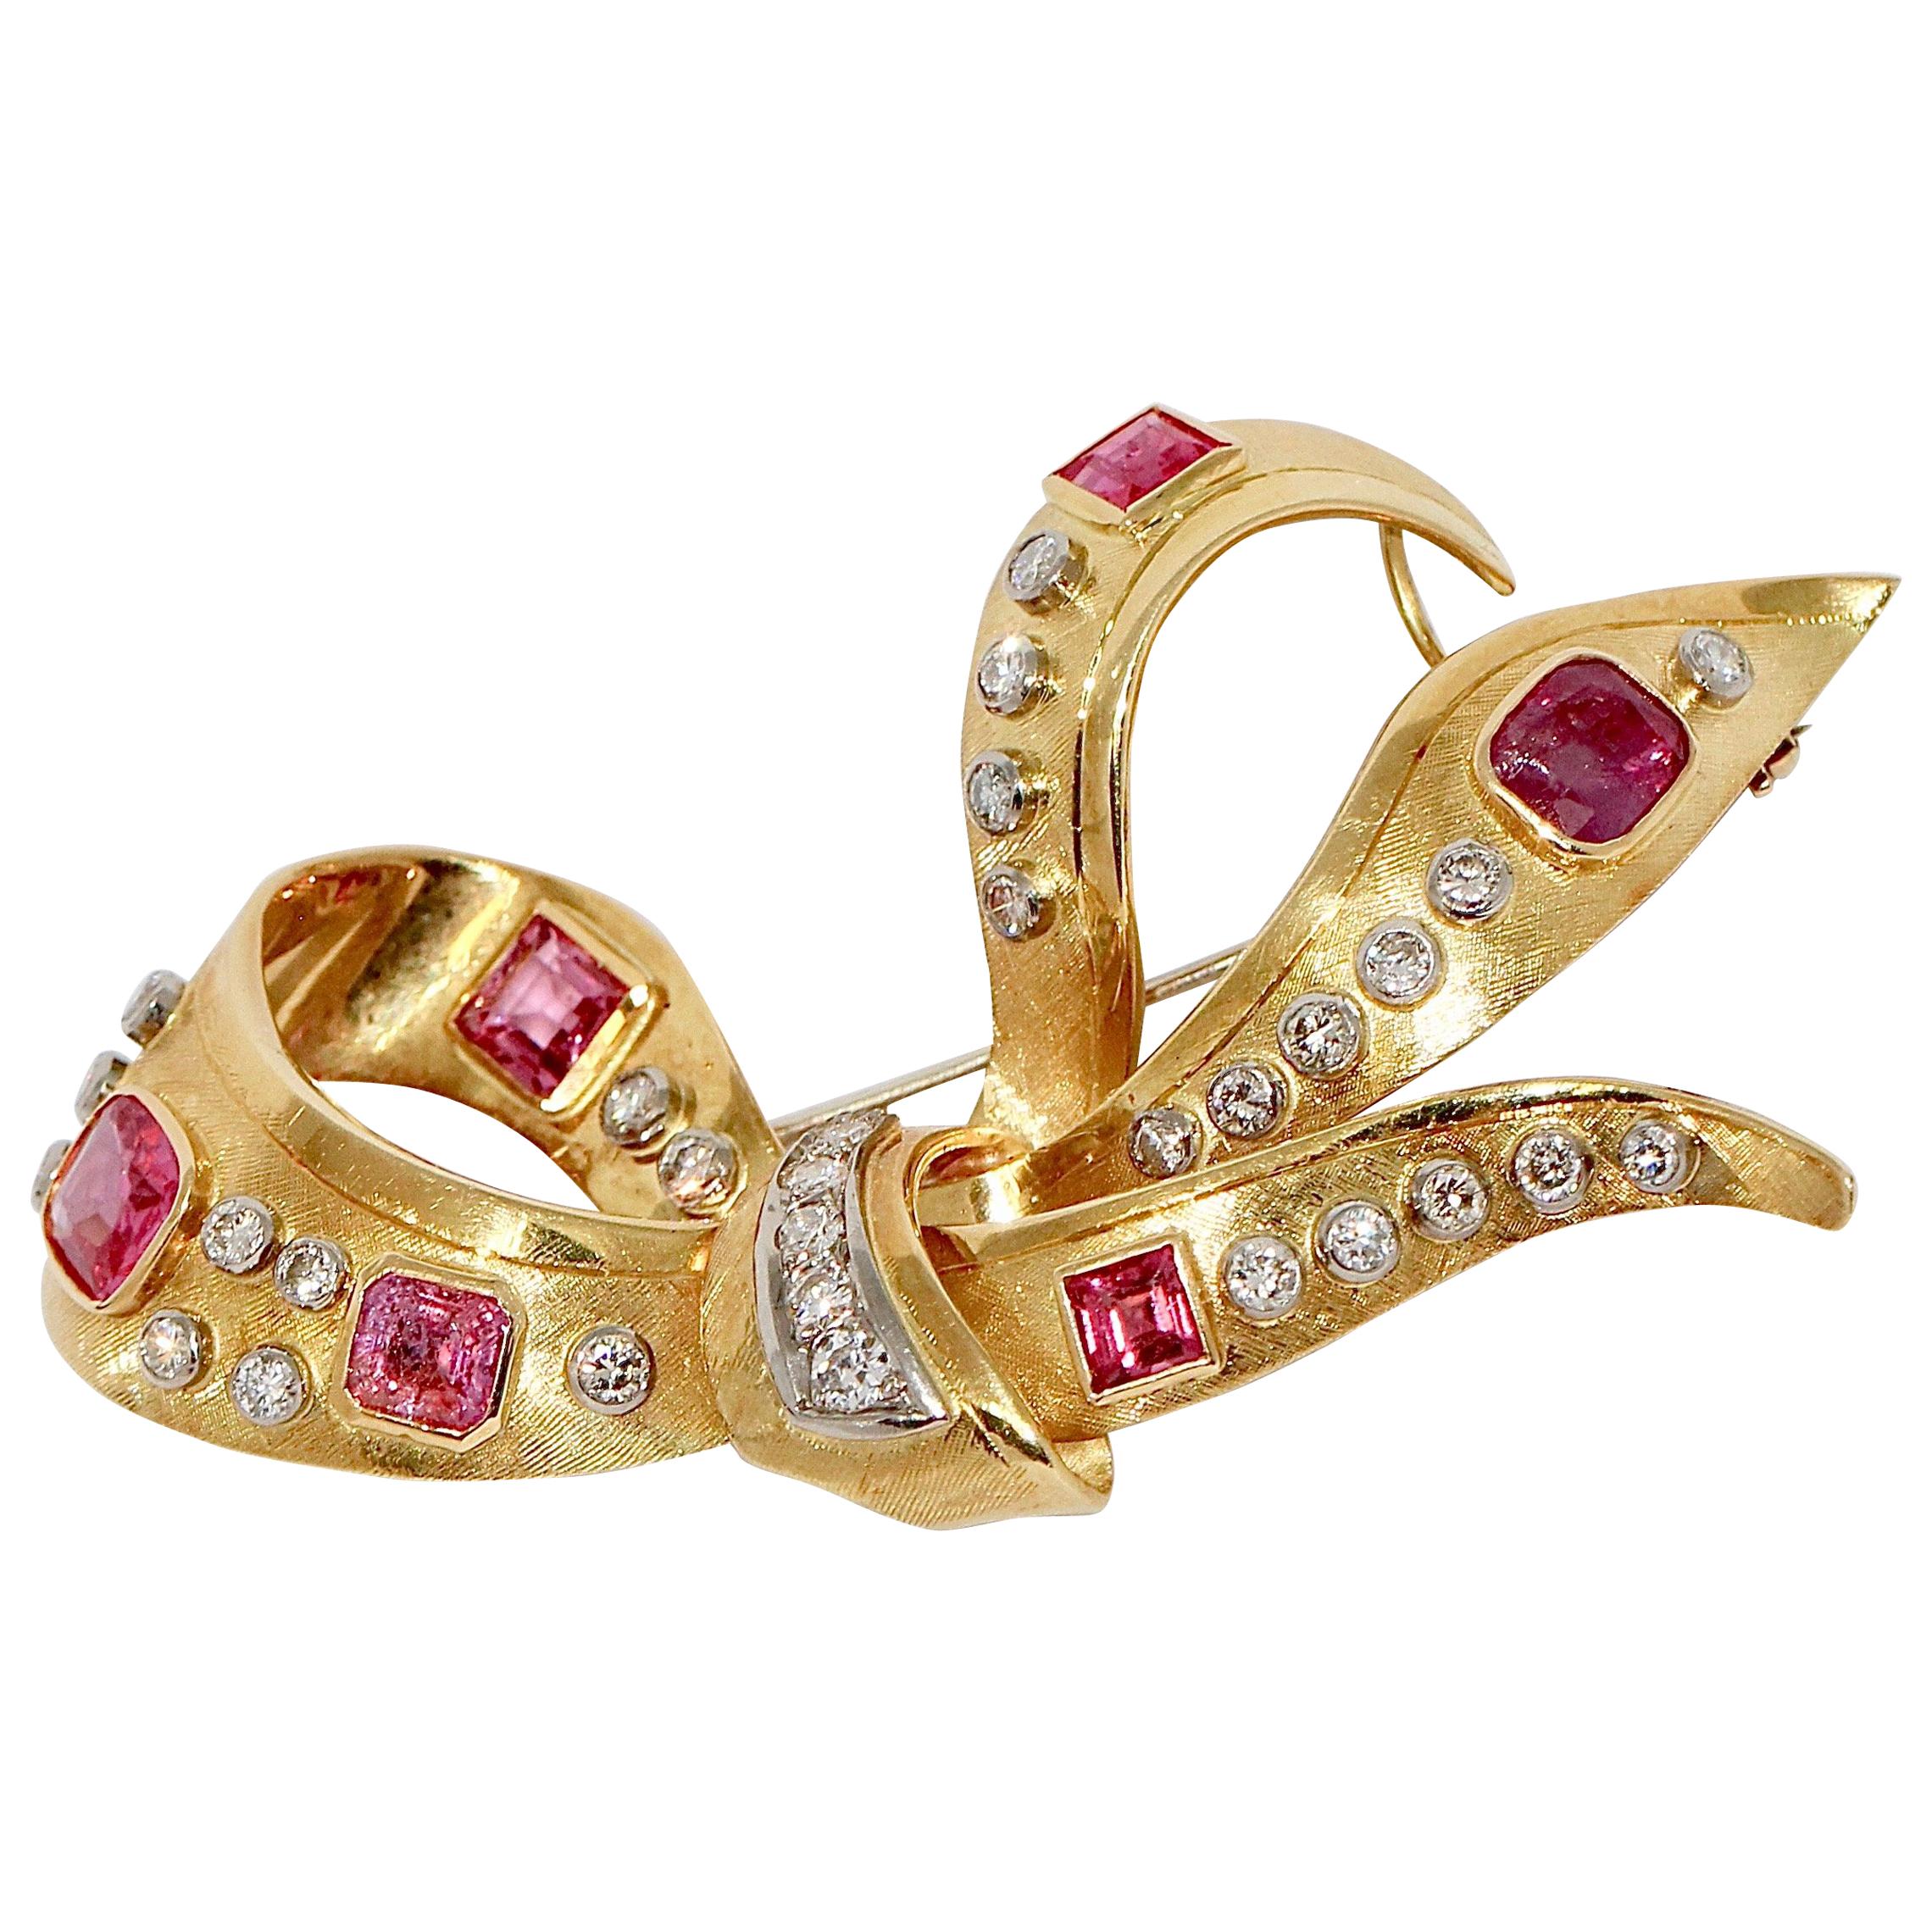 Large Elegant Gold Brooch in a Loop Shape 18 Karat Gold with Rubies and Diamonds For Sale